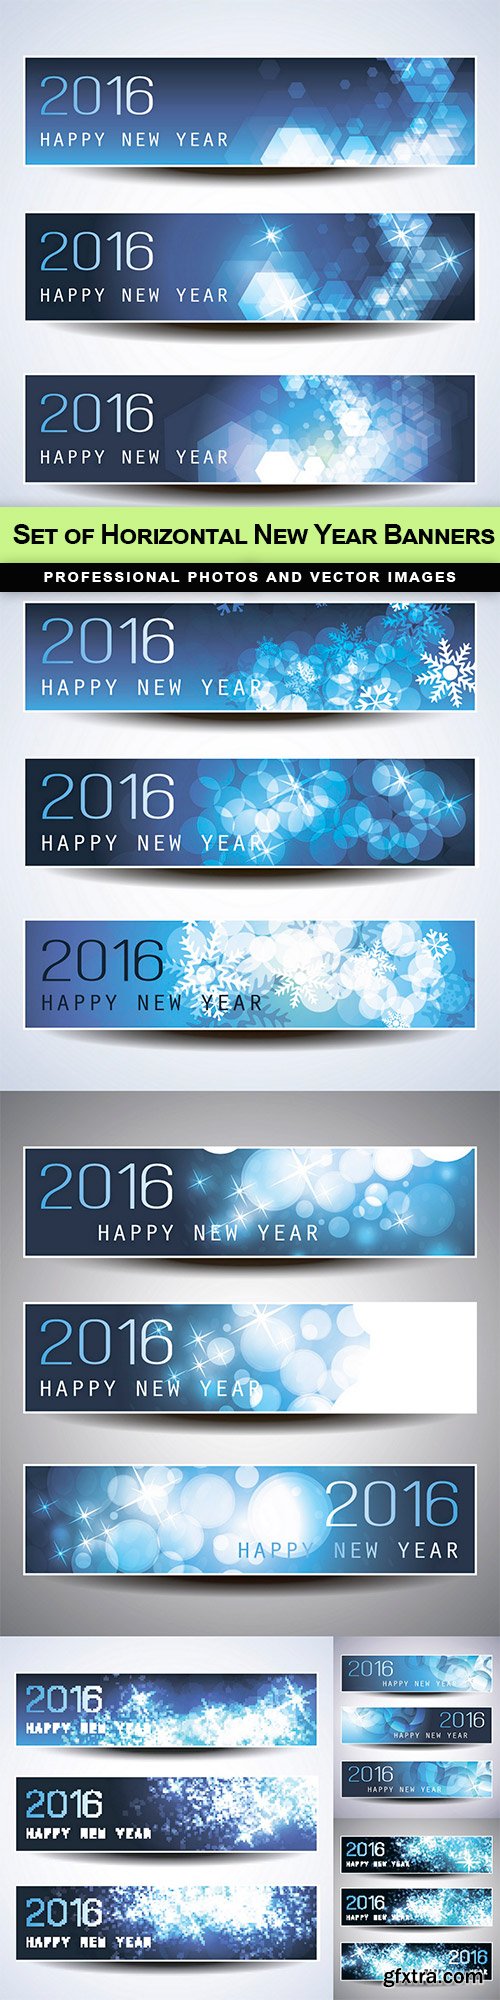 Set of Horizontal New Year Banners - 6 EPS